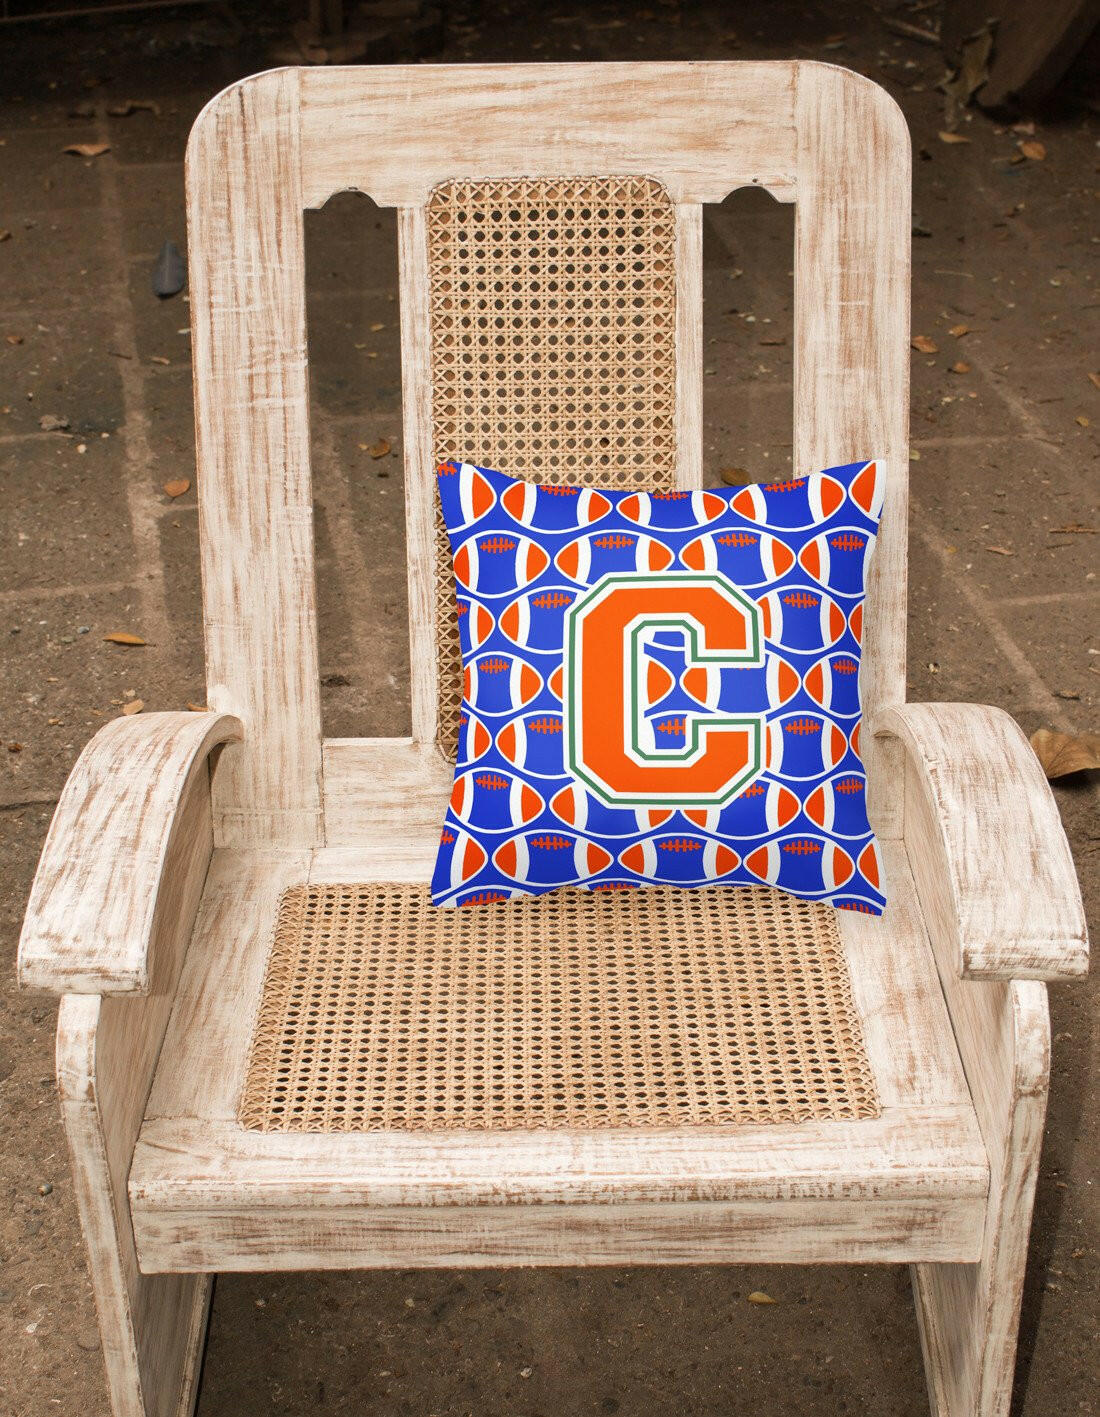 Letter C Football Green, Blue and Orange Fabric Decorative Pillow CJ1083-CPW1414 by Caroline's Treasures